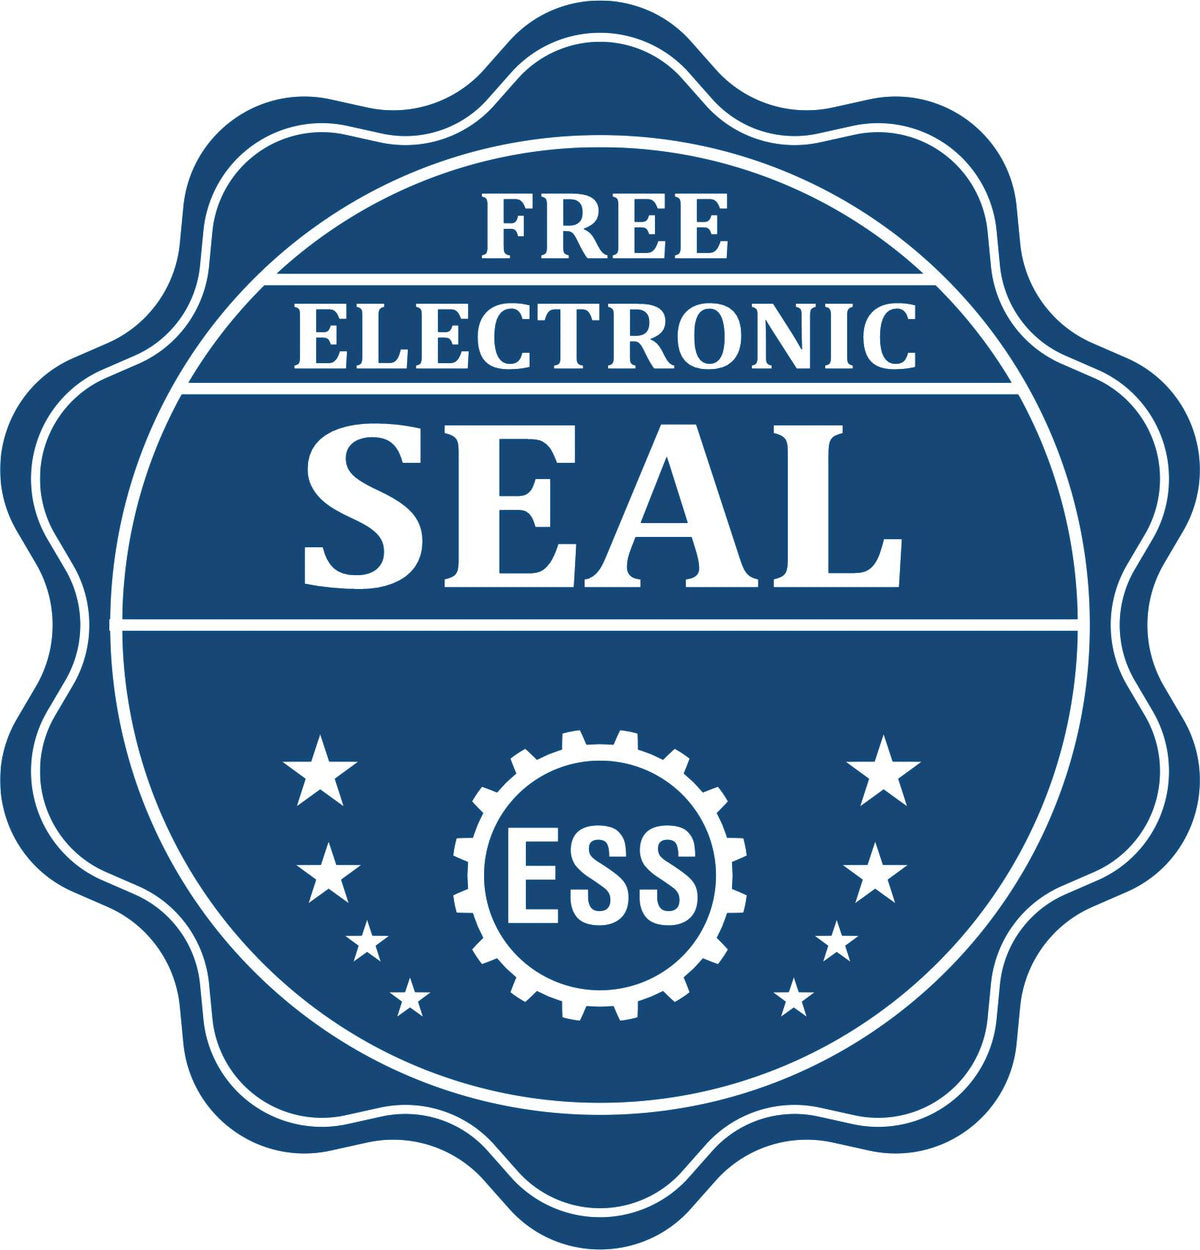 A badge showing a free electronic seal for the Heavy-Duty Nebraska Rectangular Notary Stamp with stars and the ESS gear on the emblem.